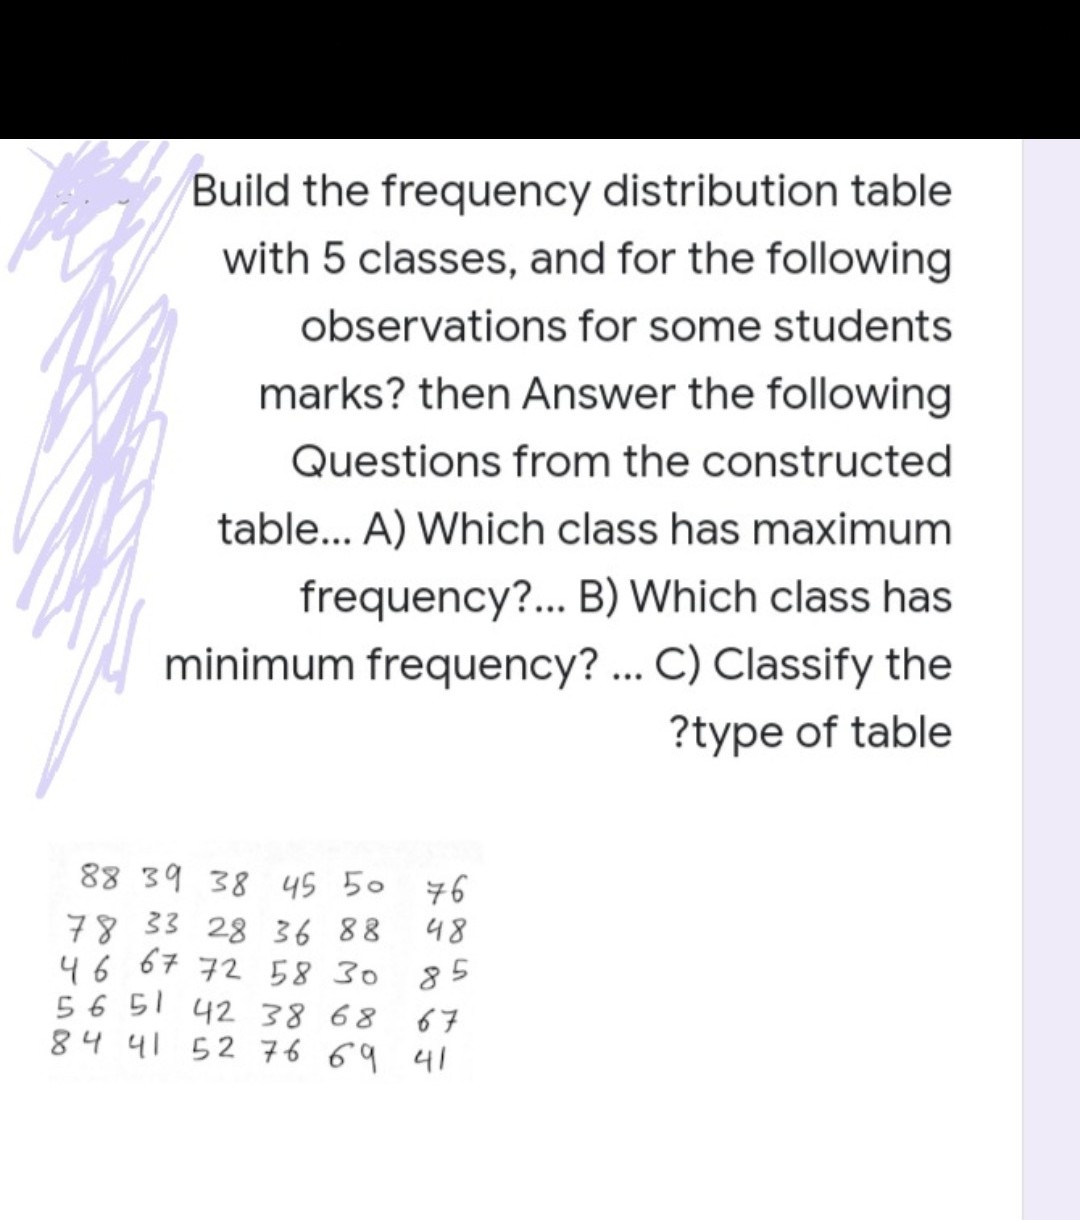 Build the frequency distribution table
with 5 classes, and for the following
observations for some students
marks? then Answer the following
Questions from the constructed
table... A) Which class has maximum
frequency?... B) Which class has
minimum frequency? .. C) Classify the
?type of table
88 39 38 45 50 76
78 33 28 36 88
46 67 72 58 30
85
56 51 42 38 68
67
84 41 52 76 69 41
685
ト
